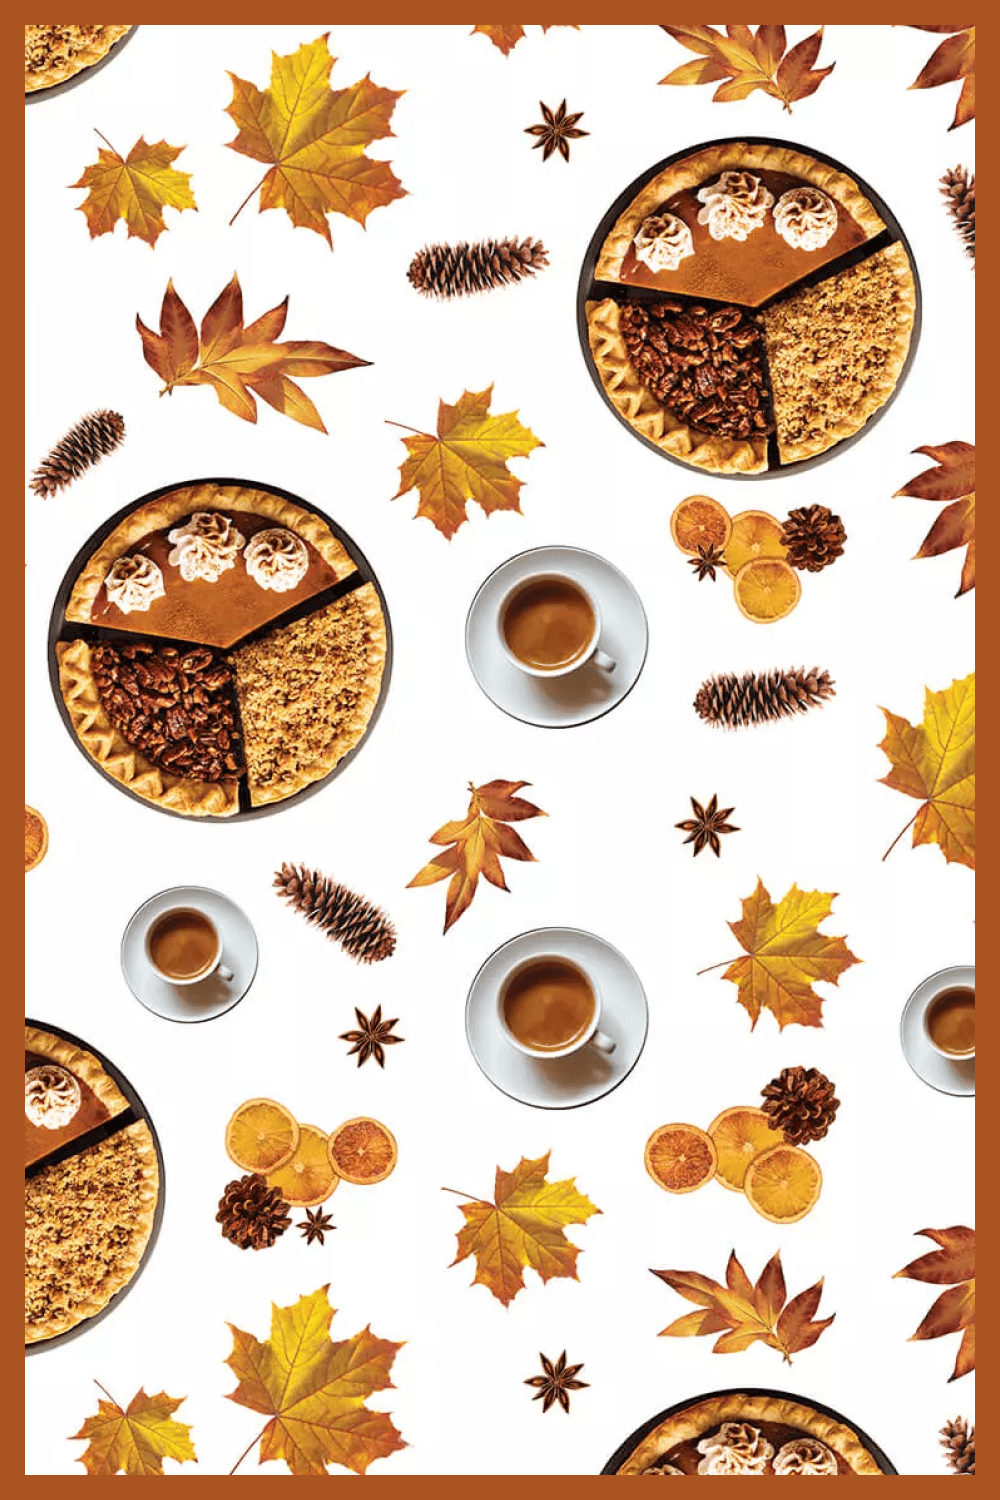 Pies, coffee, cones, autumn leaves on a white background.